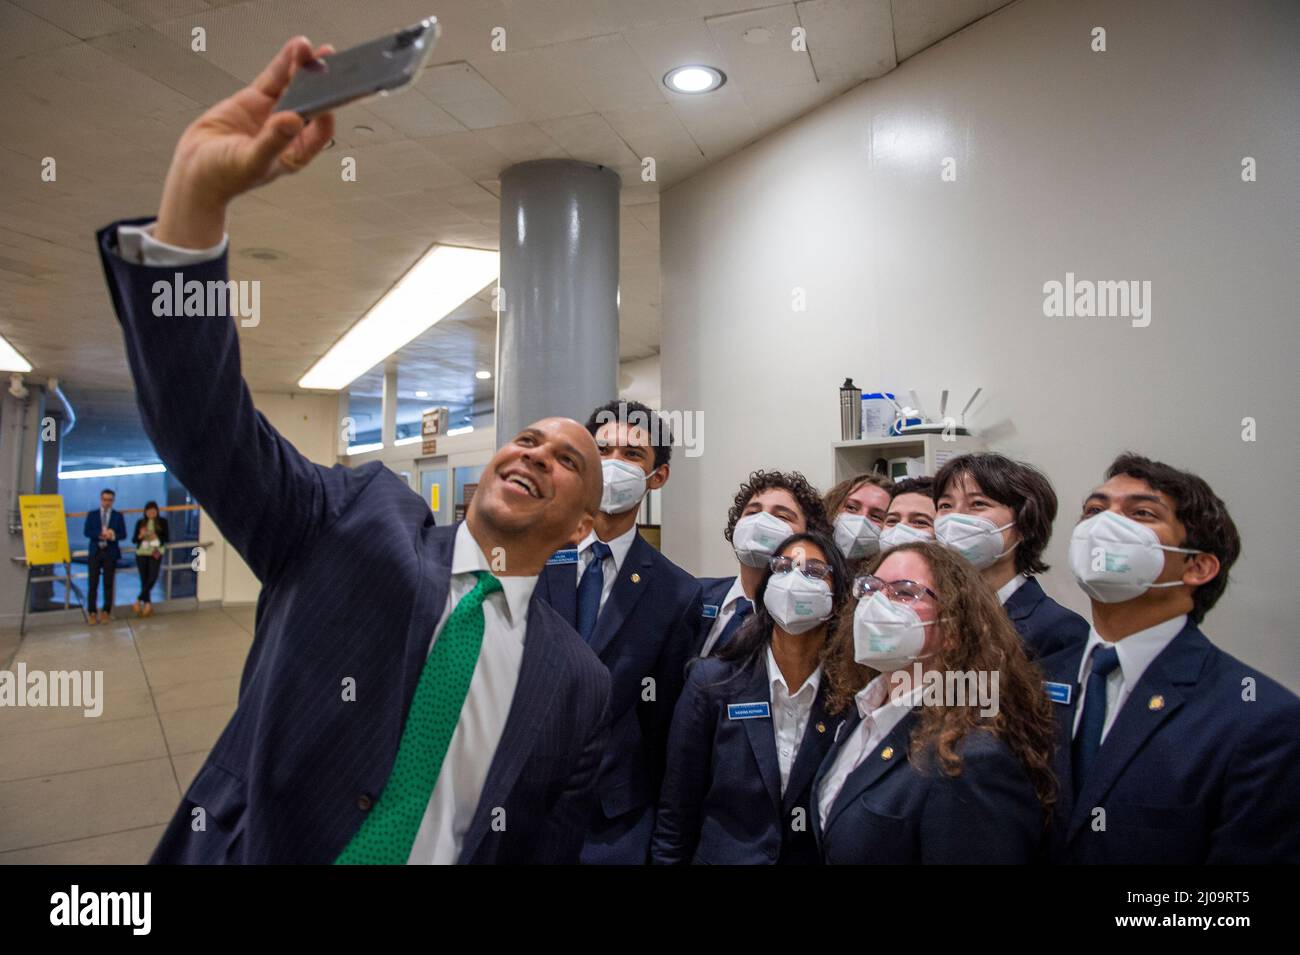 Washington, United States Of America. 17th Mar, 2022. United States Senator Cory Booker (Democrat of New Jersey) takes a moment for a selfie photo with a group of pages in the Senate subway at the US Capitol during a vote in Washington, DC, Thursday, March 17, 2022. Credit: Rod Lamkey/CNP/Sipa USA Credit: Sipa USA/Alamy Live News Stock Photo